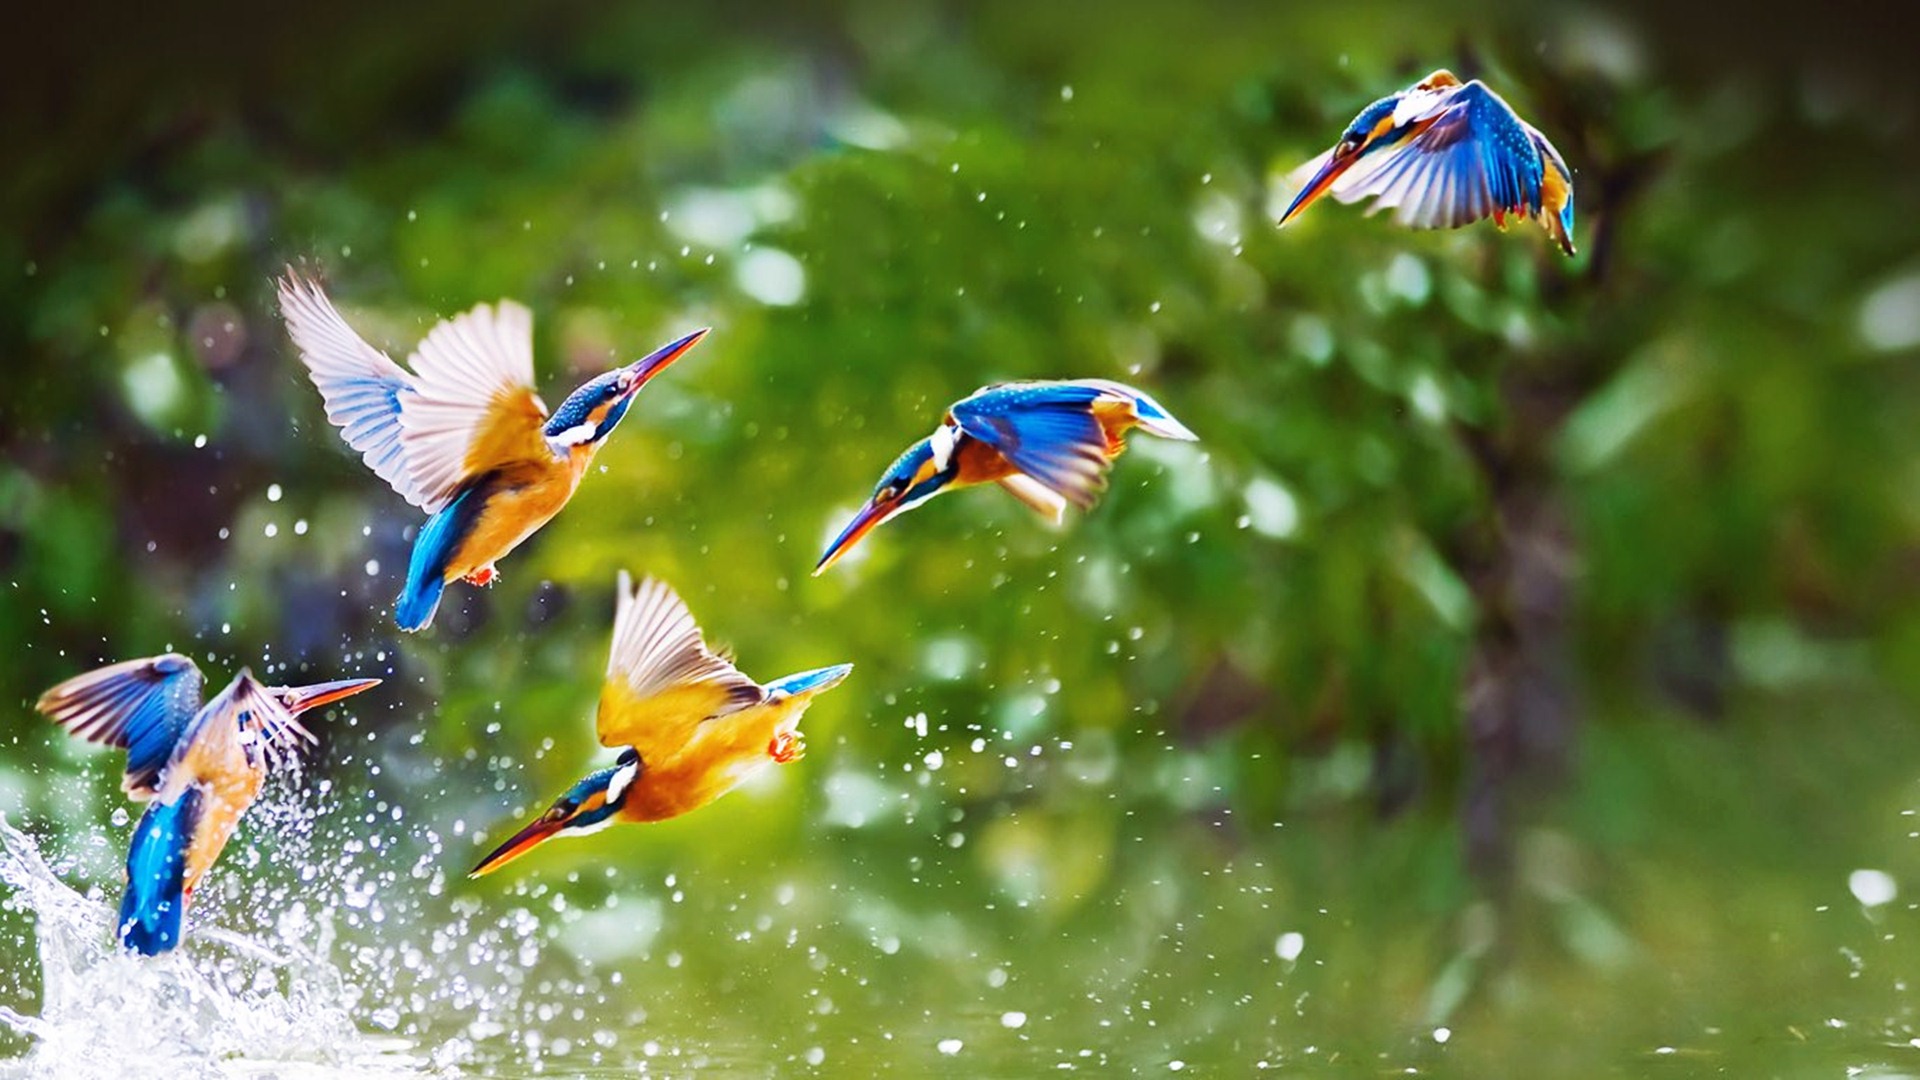 Beautiful Birds Wallpapers HD Pictures Live HD Wallpaper HQ Pictures 1920x1080